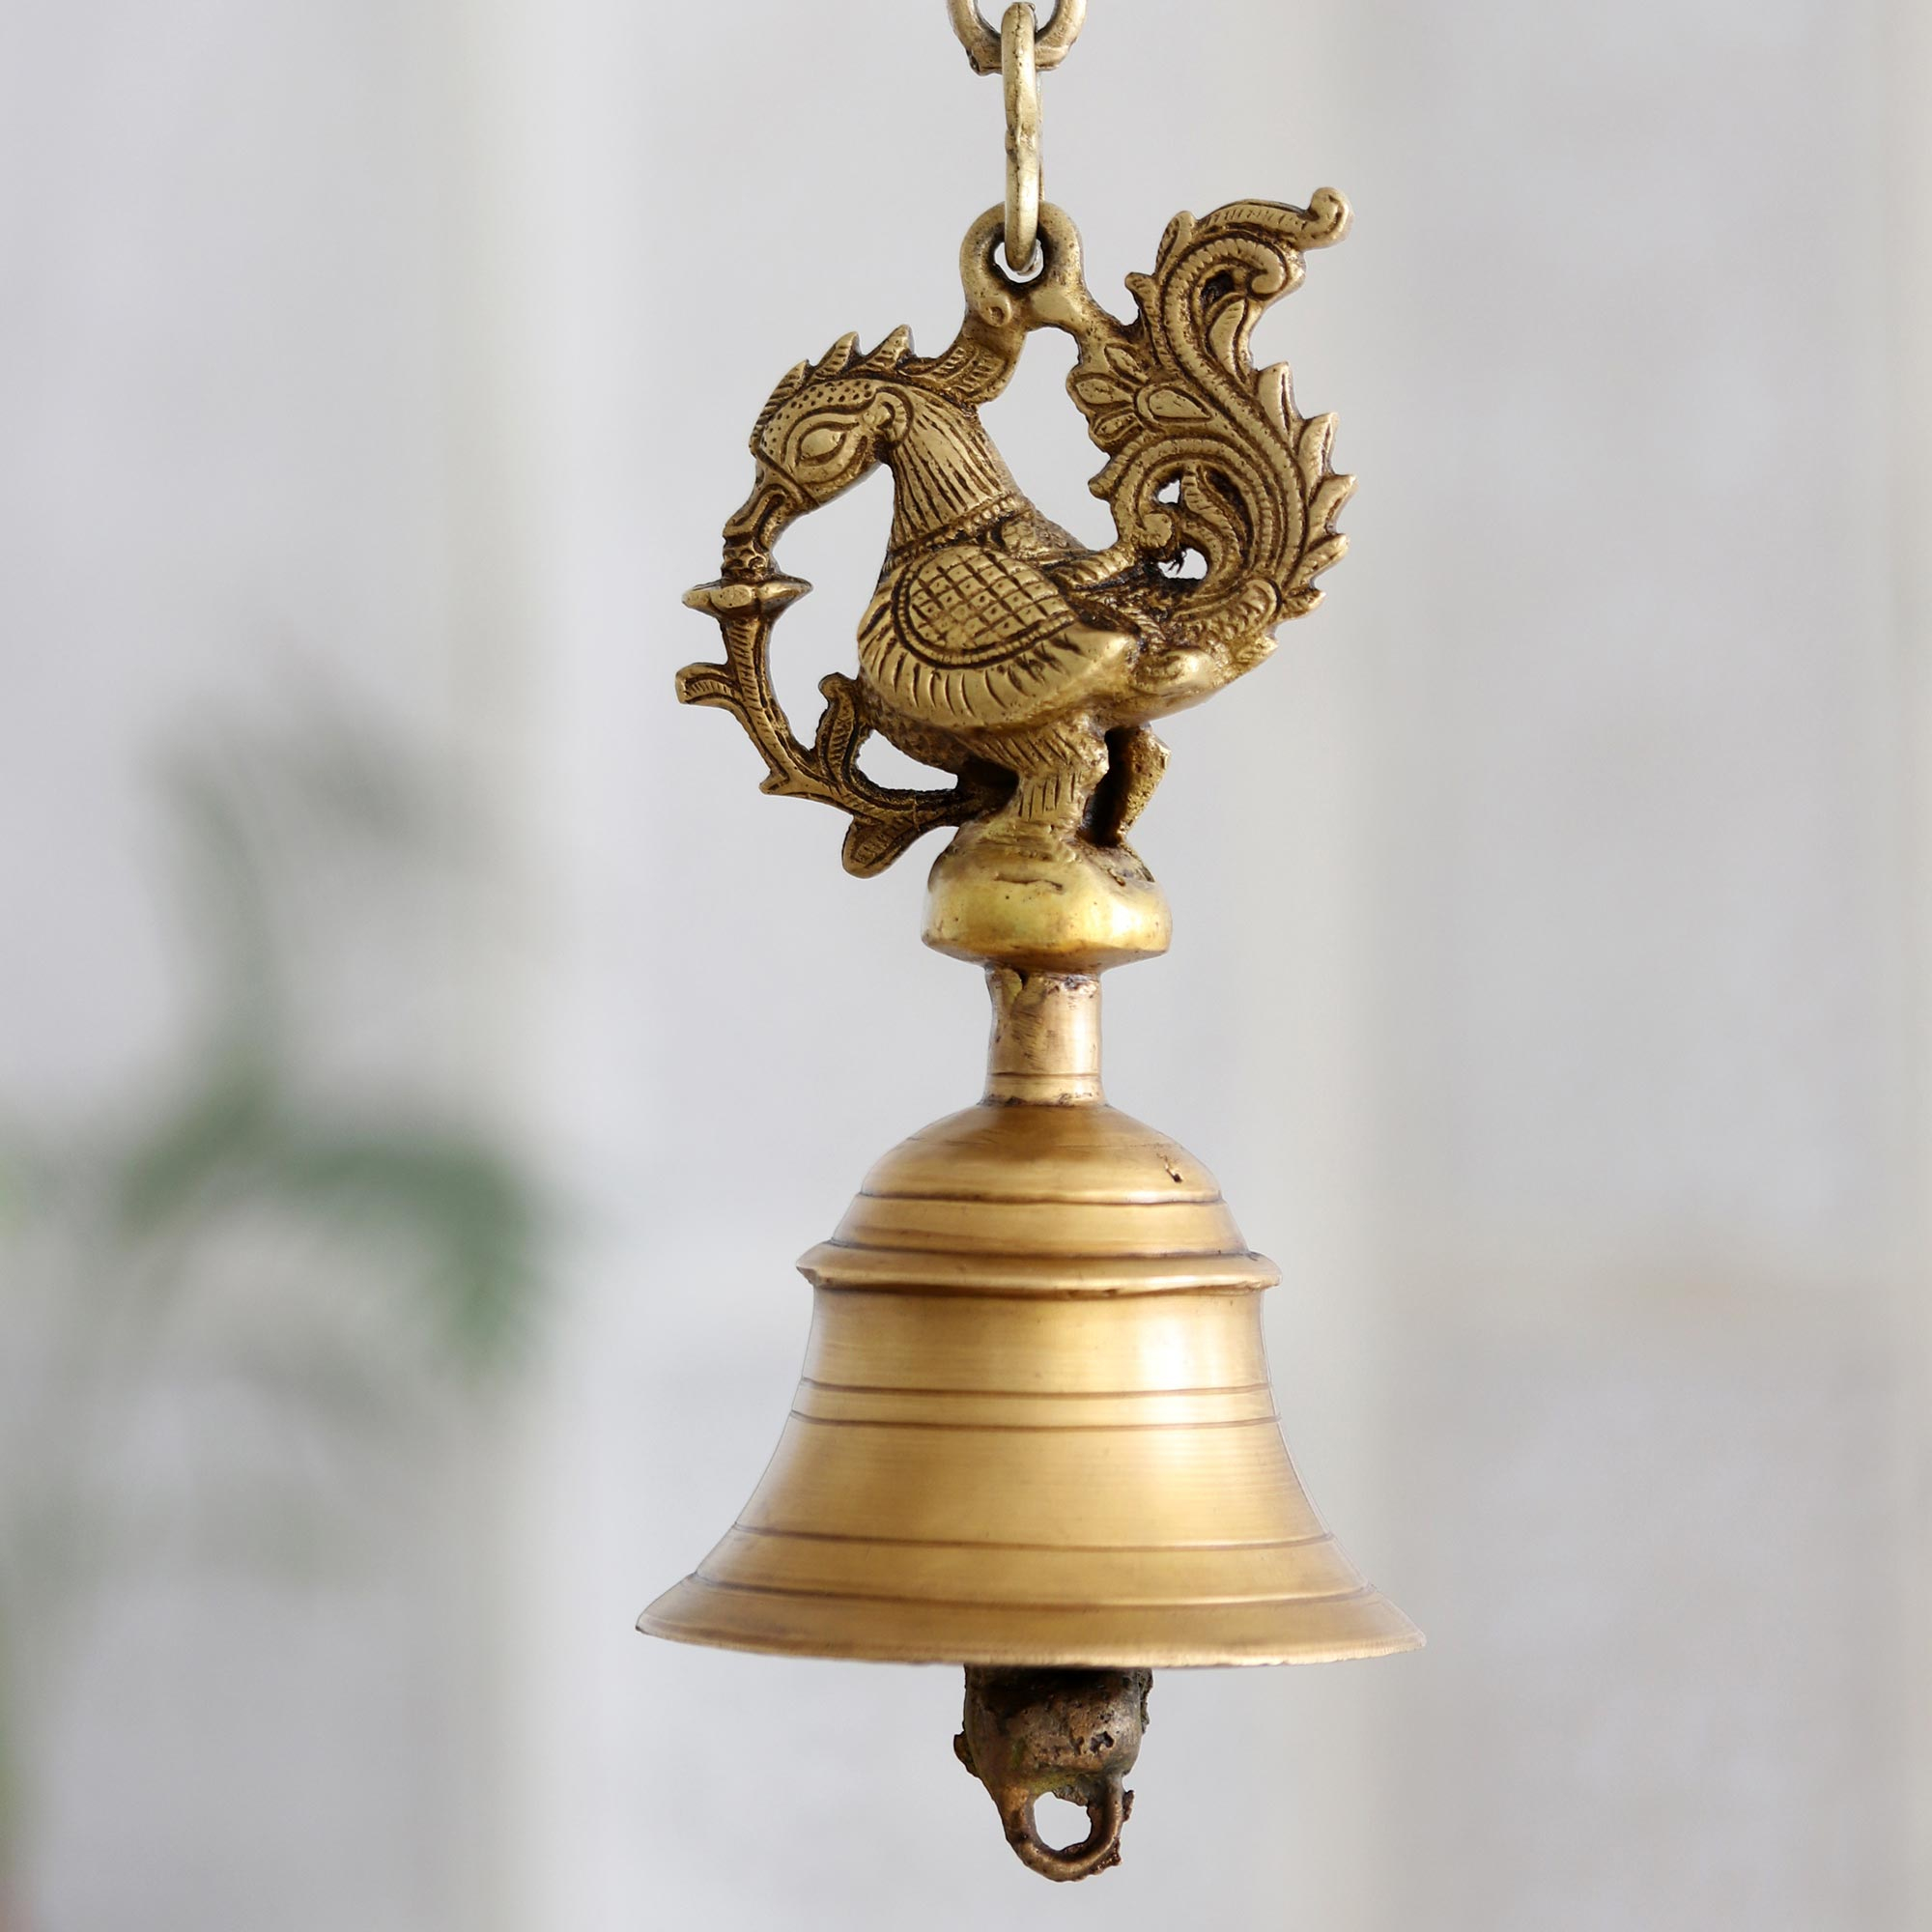 Brass Temple Hanging Bell With Chain, Style : Antique, Feature